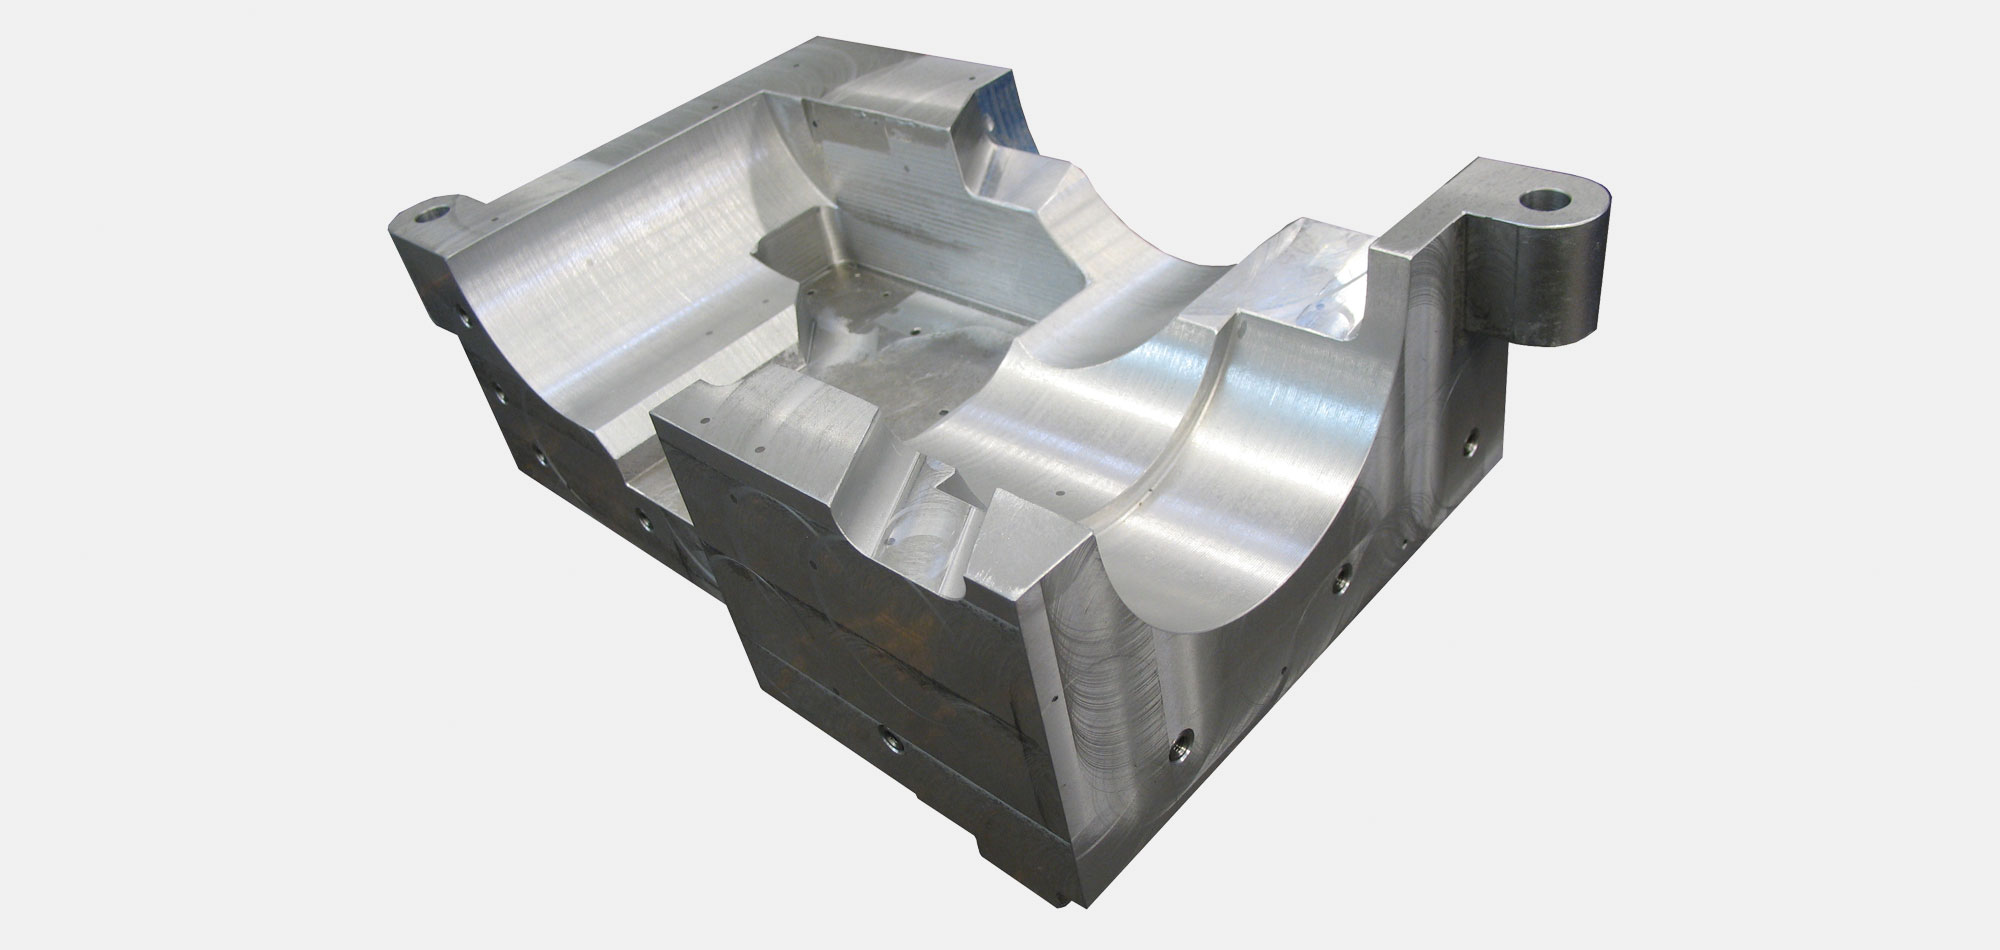 Cast-In Heaters are suitable for food industry machinery and pharmaceutical facilities. They are used for sealing and welding with and without coating. Based on uniform heat distribution, high precision of contact surfaces, reaction fast temperature range